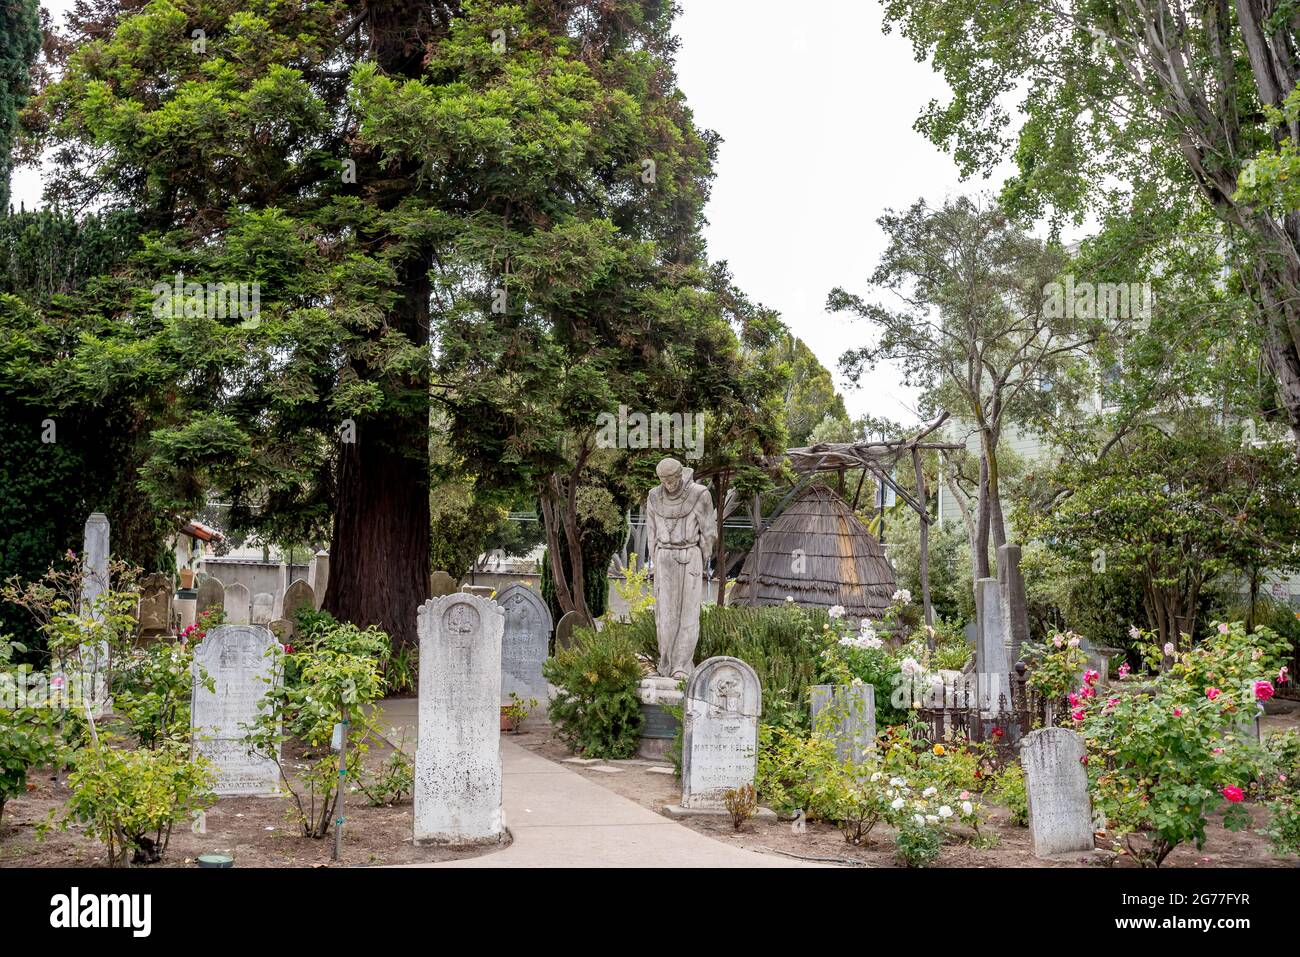 Cemetery at San Francisco Mission Dolores church. A statue of Father Junipero Serra stands in contrast with an Ohlone style indigenous family hut. Stock Photo